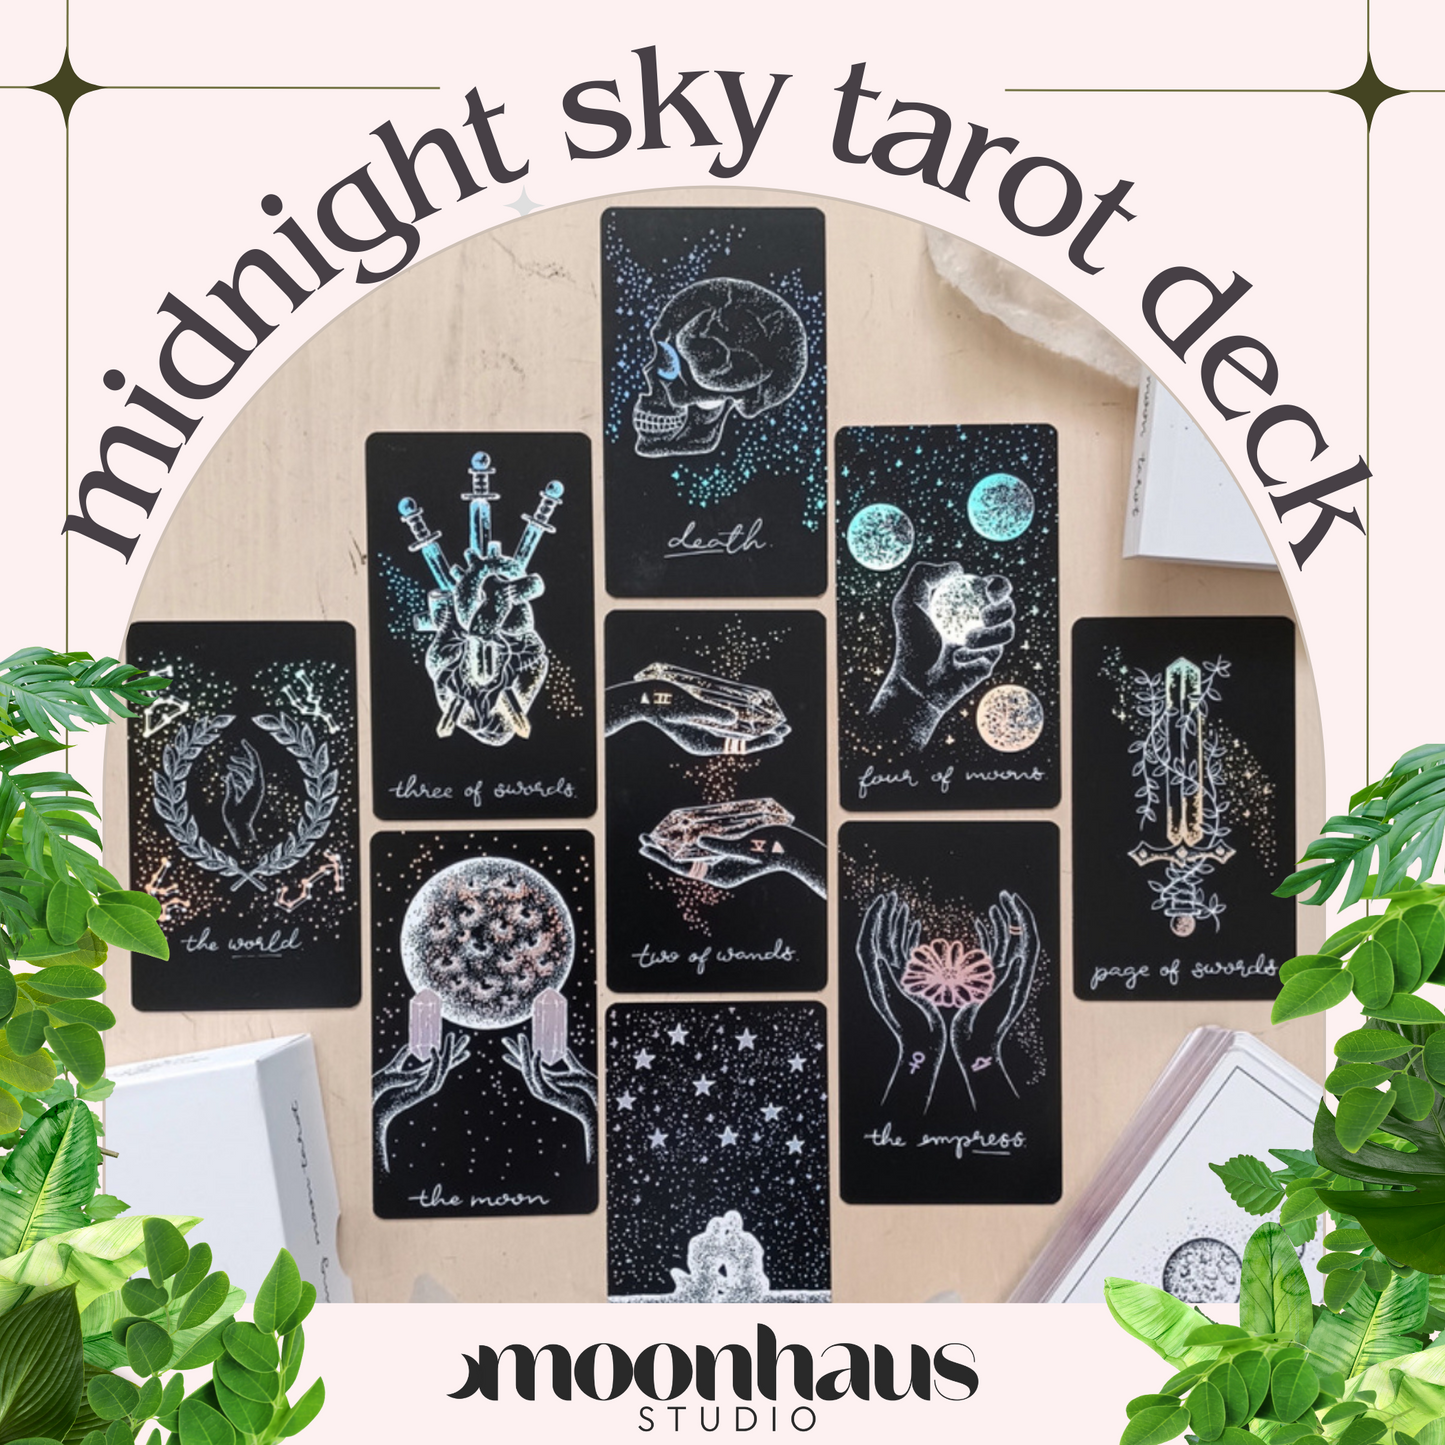 midnight sky tarot deck - indie aesthetic holographic - 81 cards, 192 page guidebook